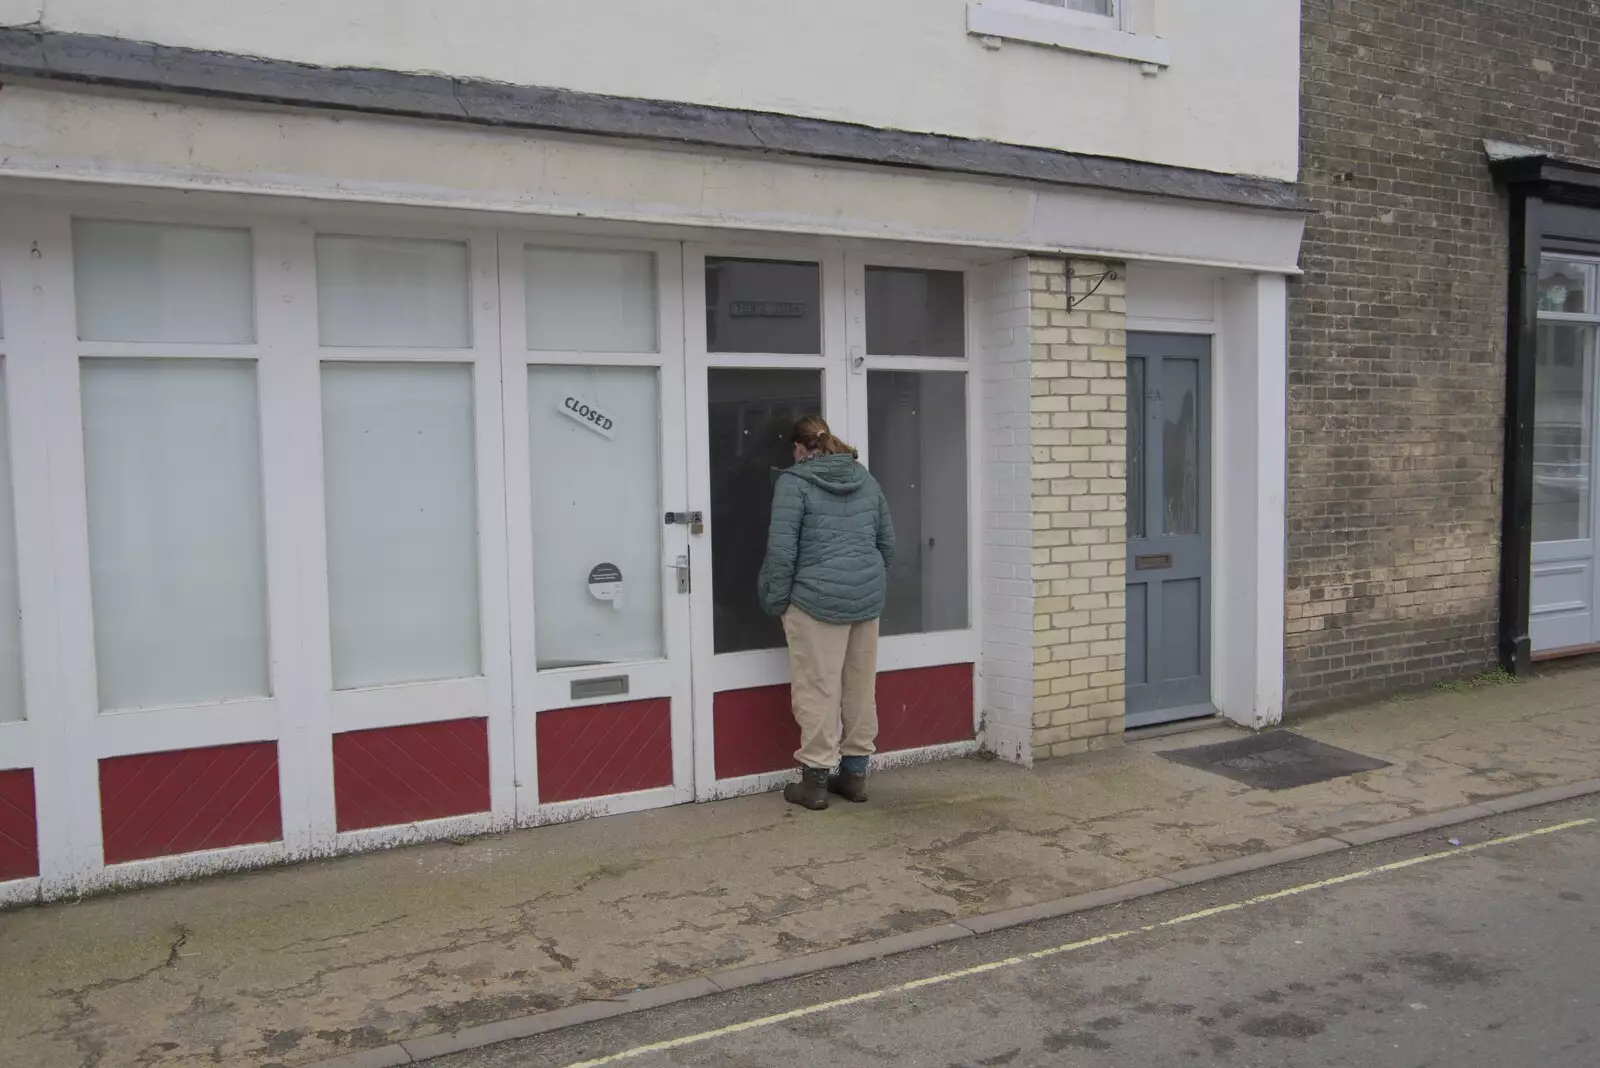 Isobel peers into the old Shurey butchers, from Palgrave Player's Wrap Party and a March Miscellany, Suffolk - 6th March 2024